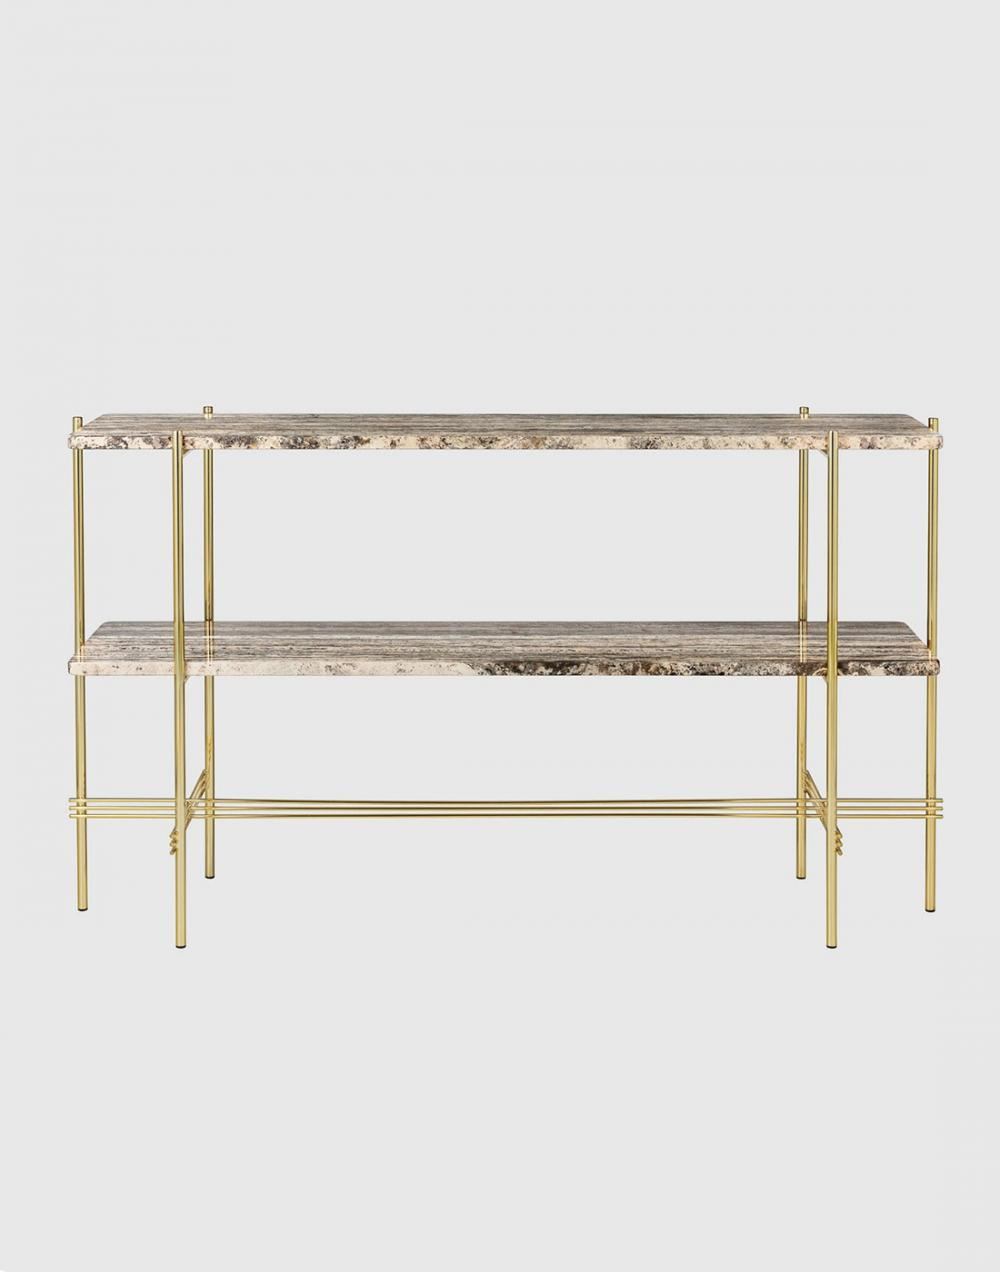 Ts Console Table Brass Frame 2 Shelves Travertinegrey